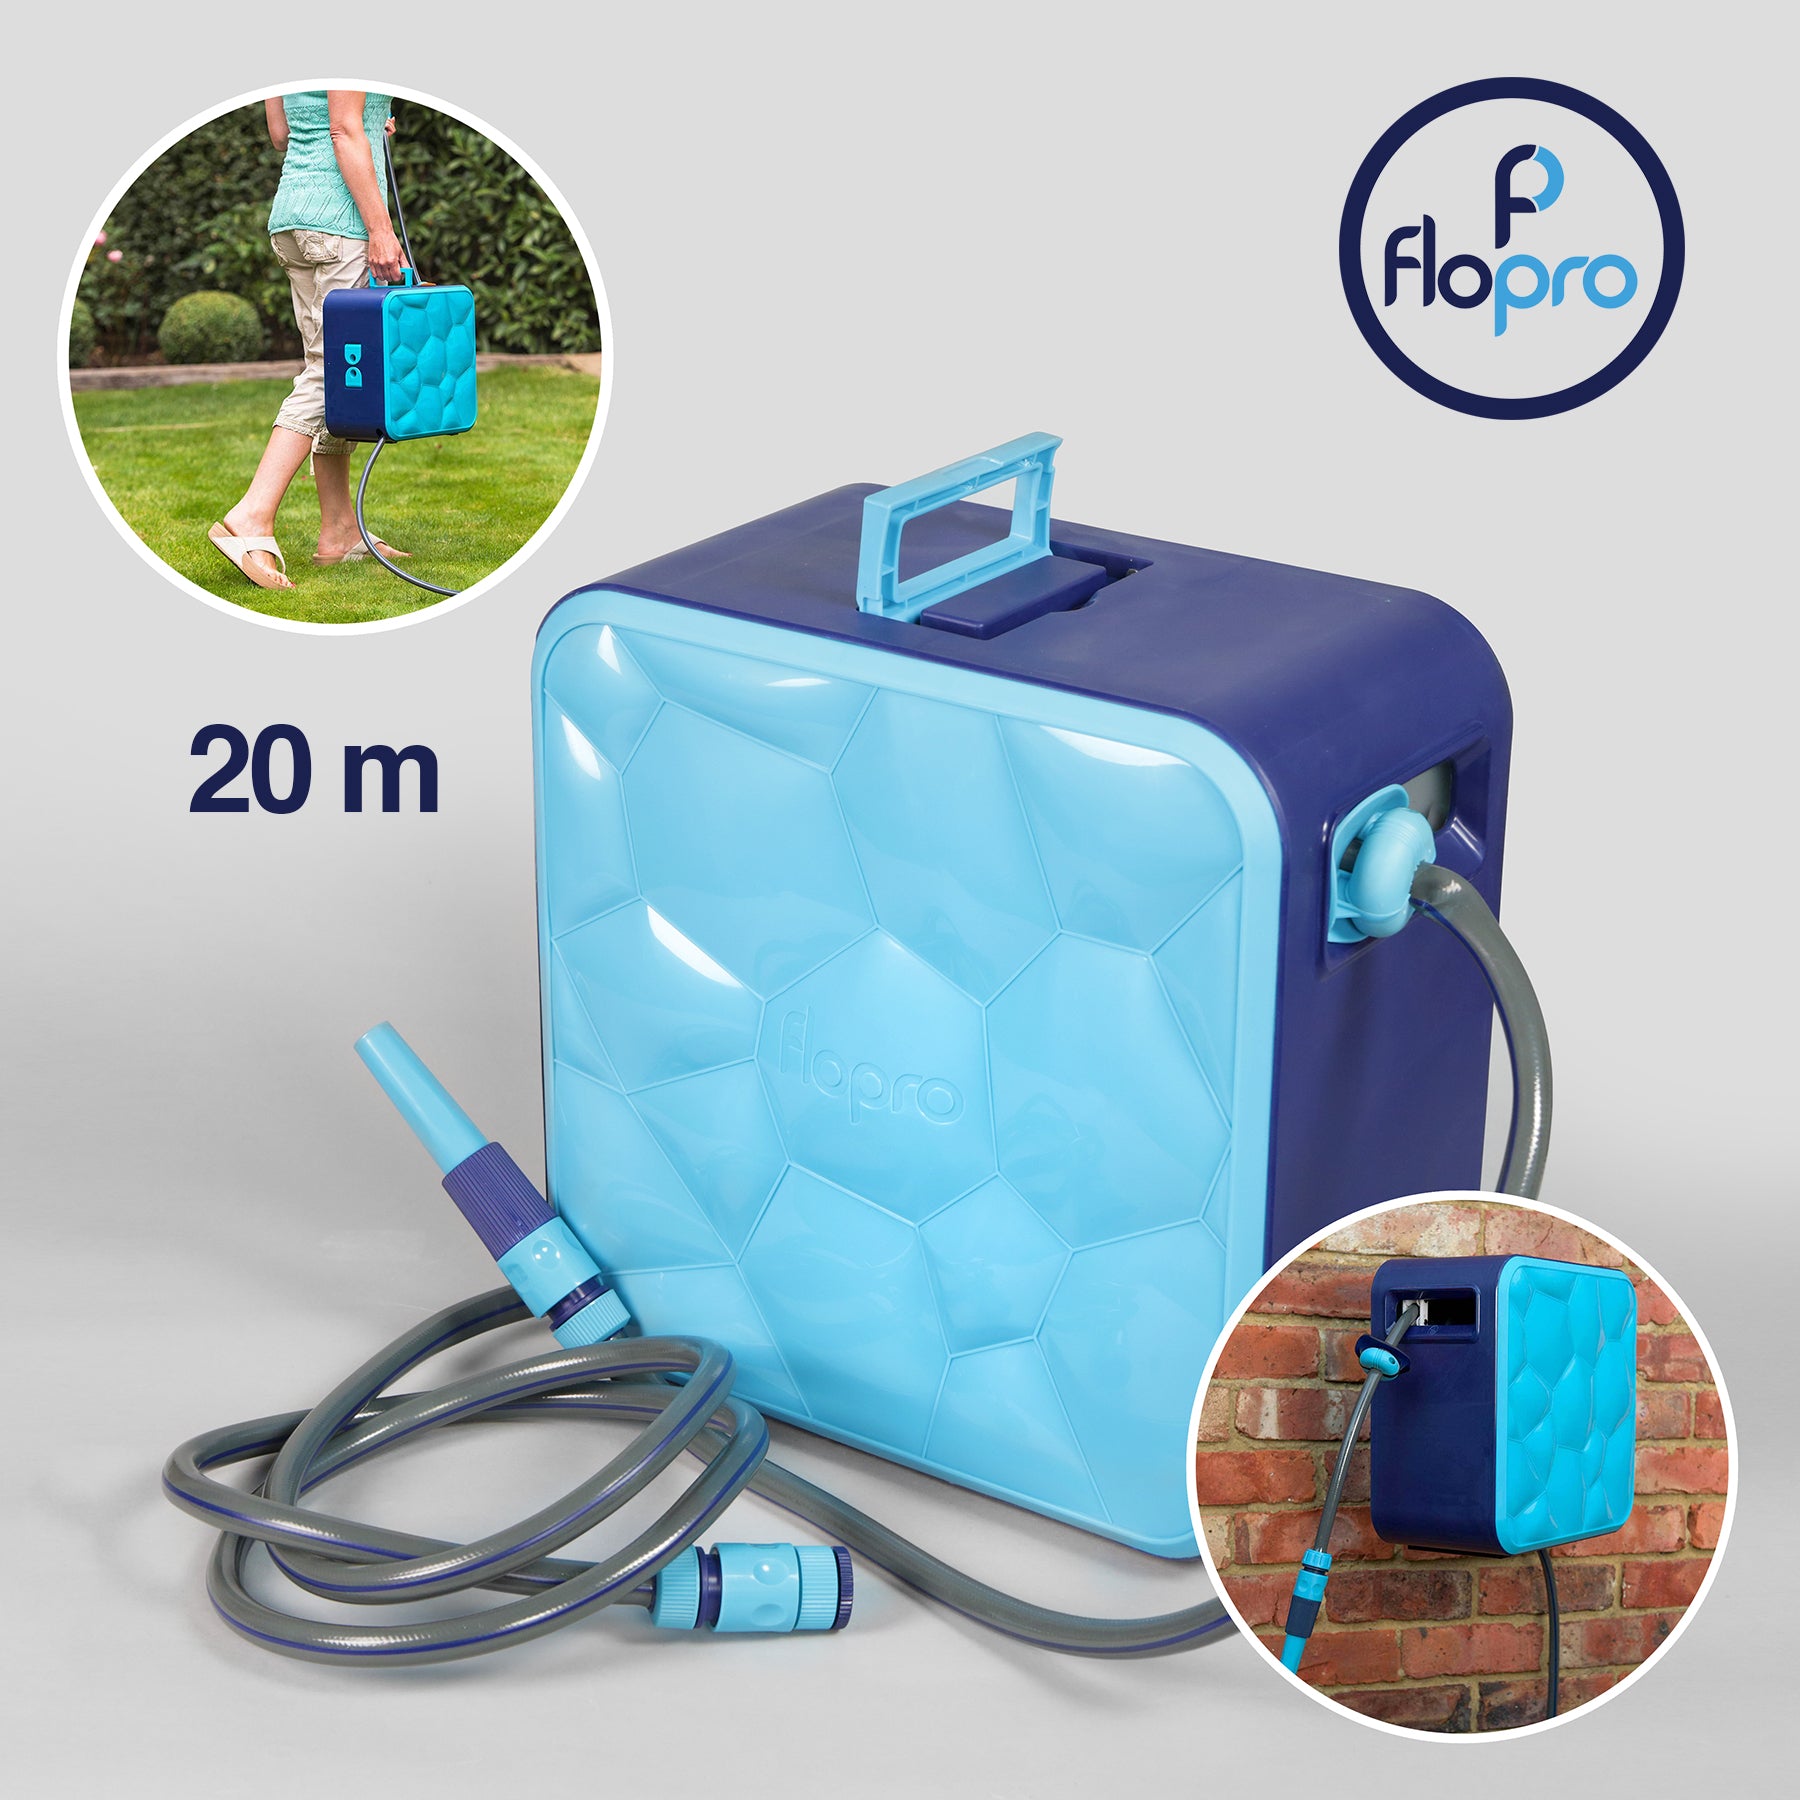 20M Cube Auto Retract Hose Reel by Flopro, sold by In-Excess